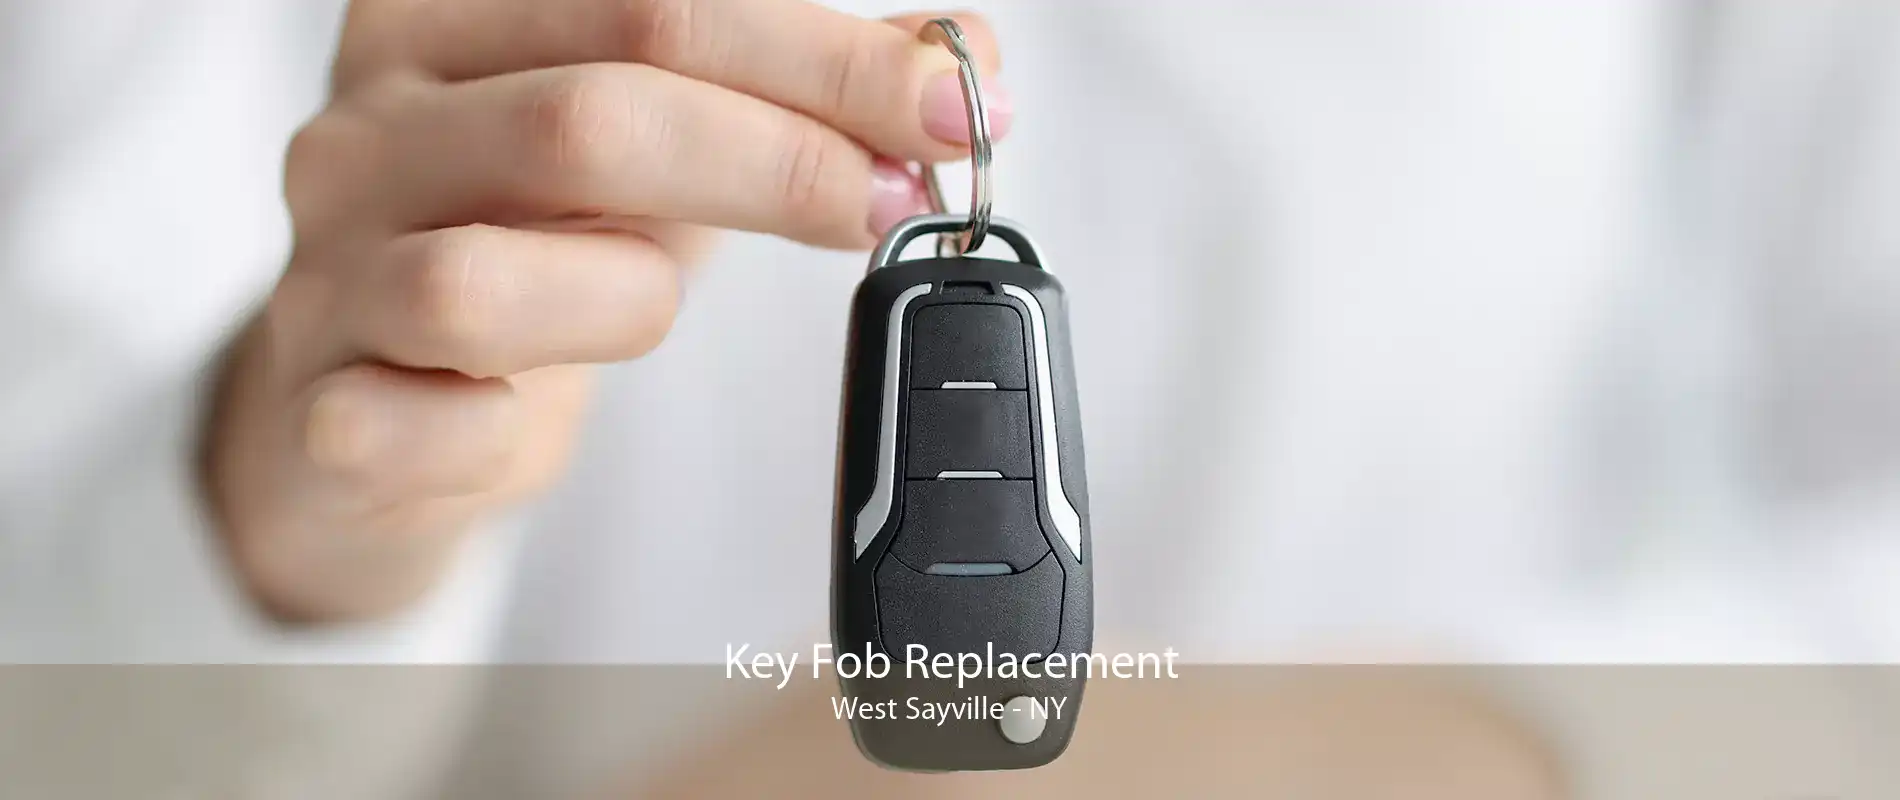 Key Fob Replacement West Sayville - NY